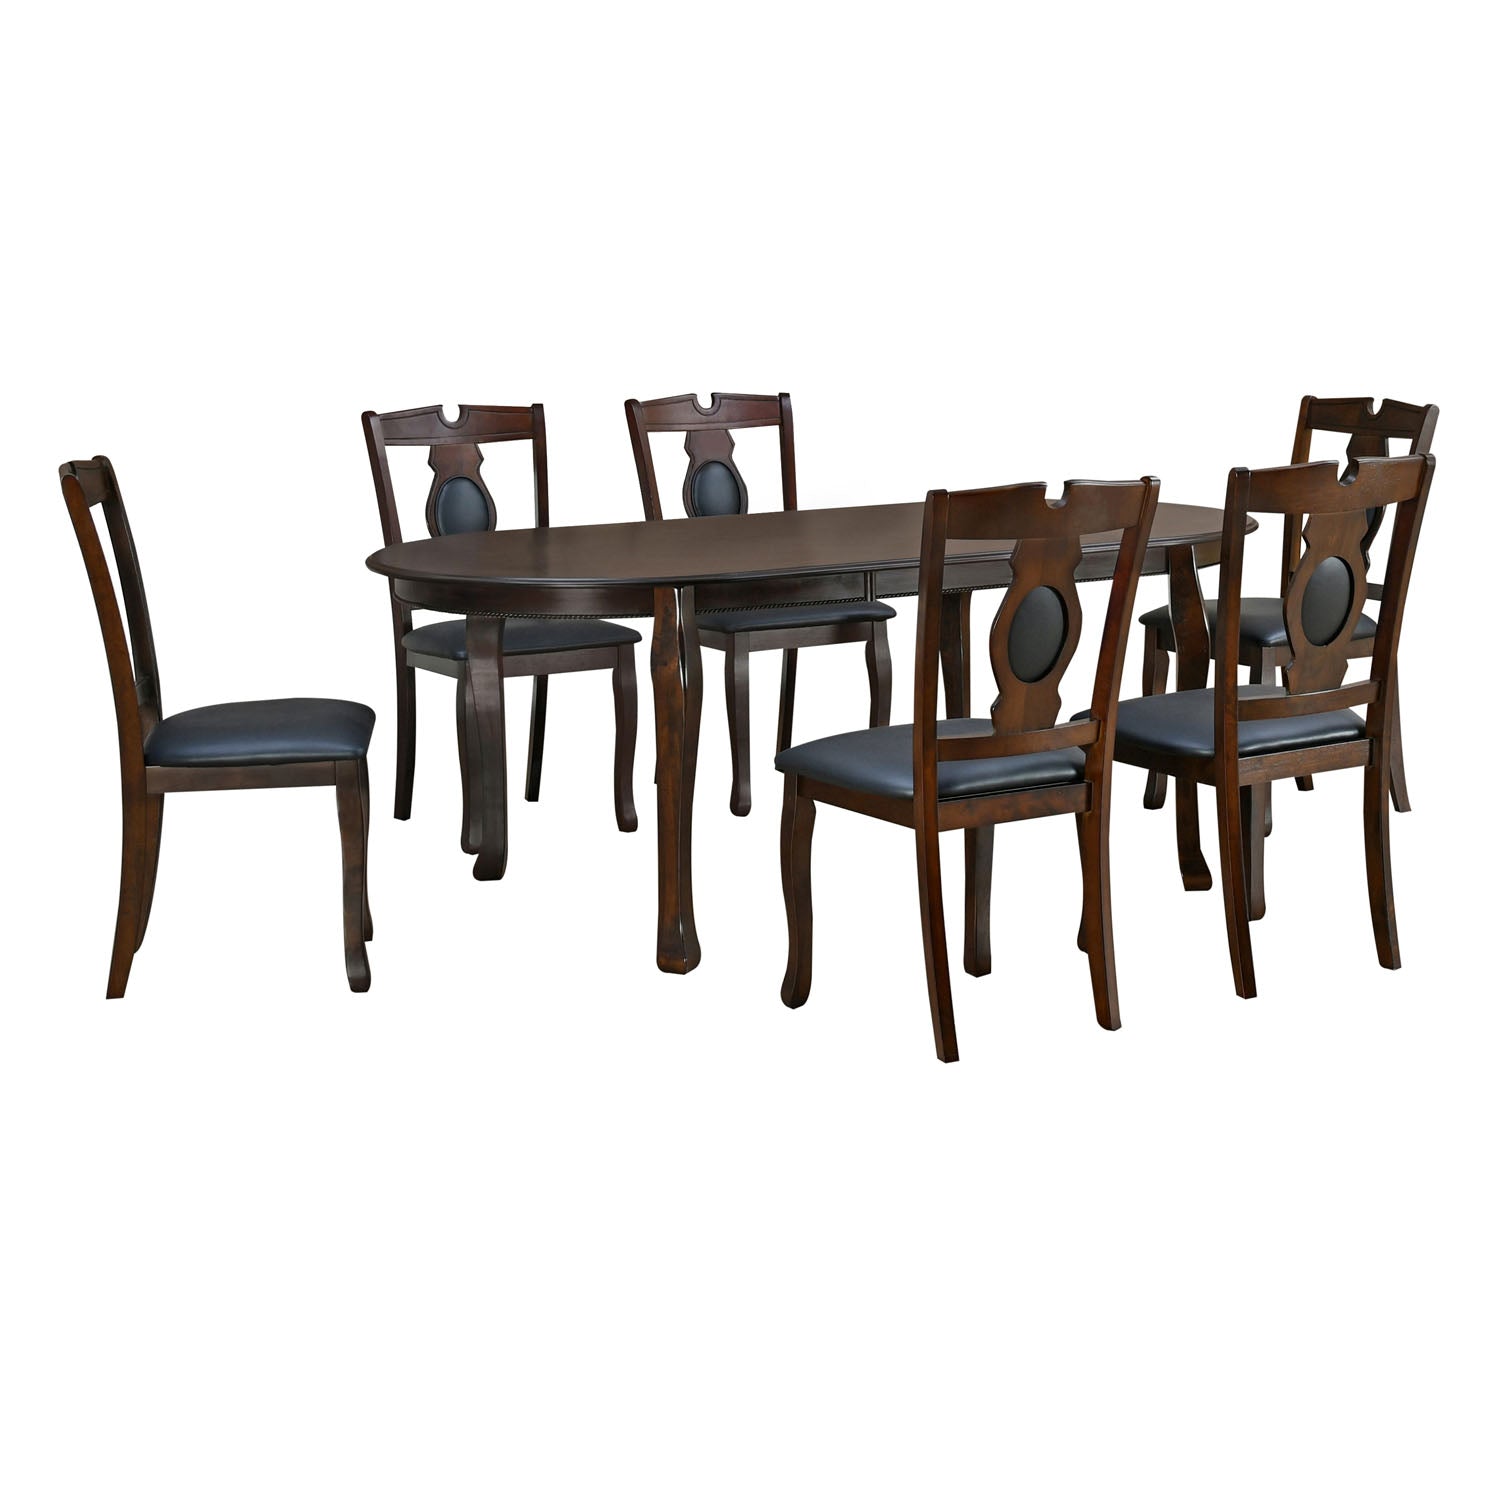 Portsmouth 6 Seater Solid Wood Dining Set (Cappucino)